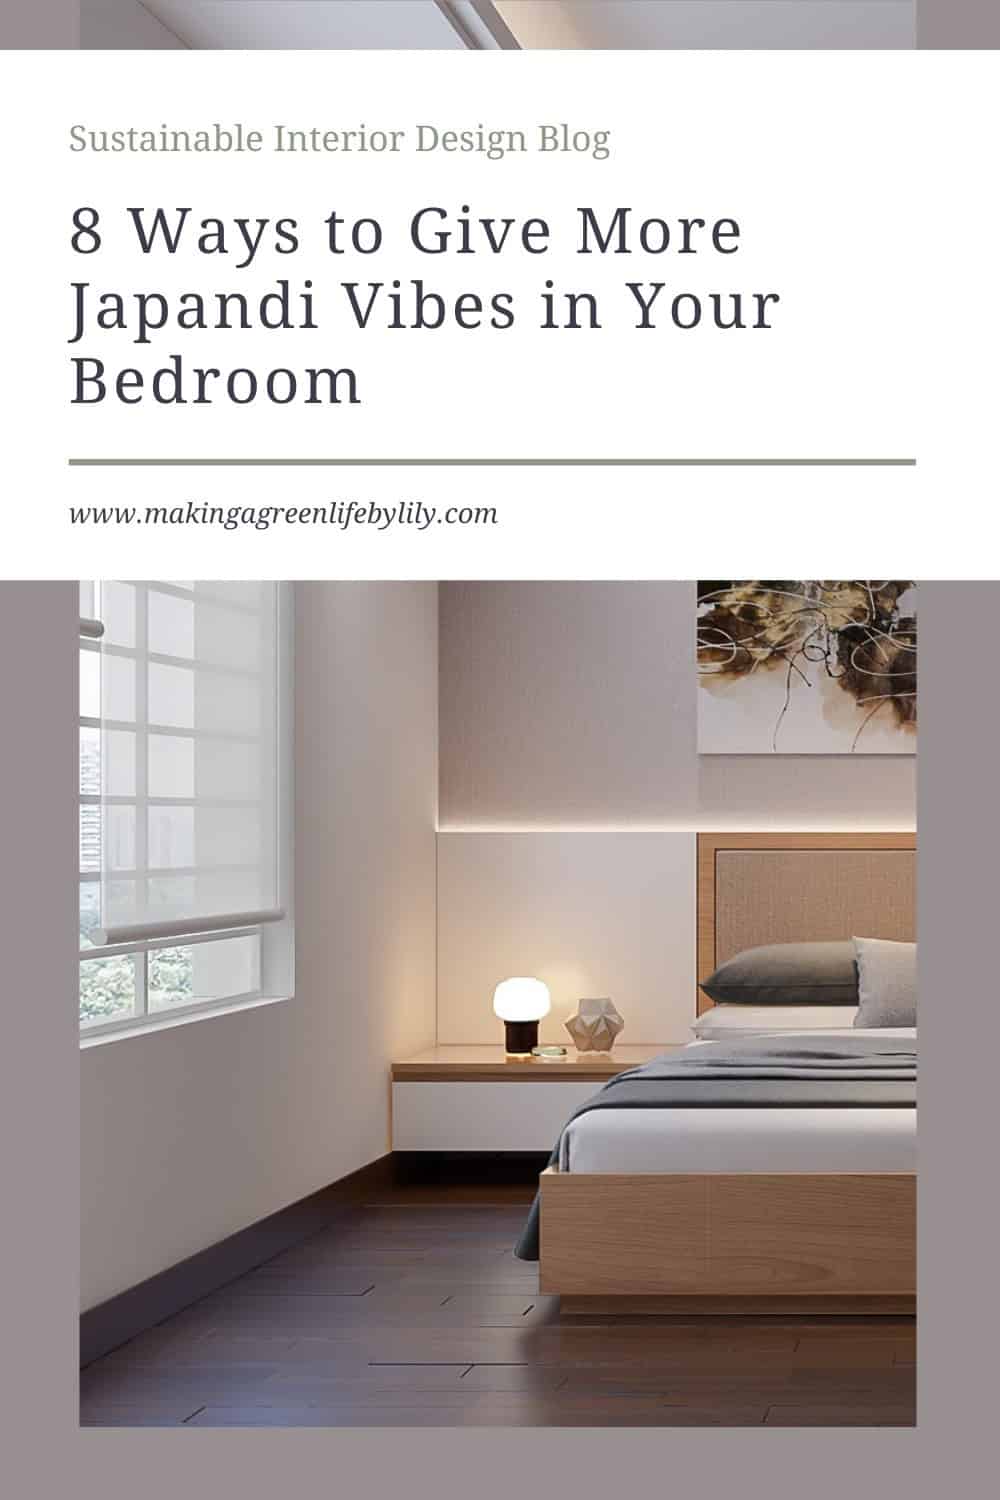 8 Ways to give more Japandi vibes in your bedroom